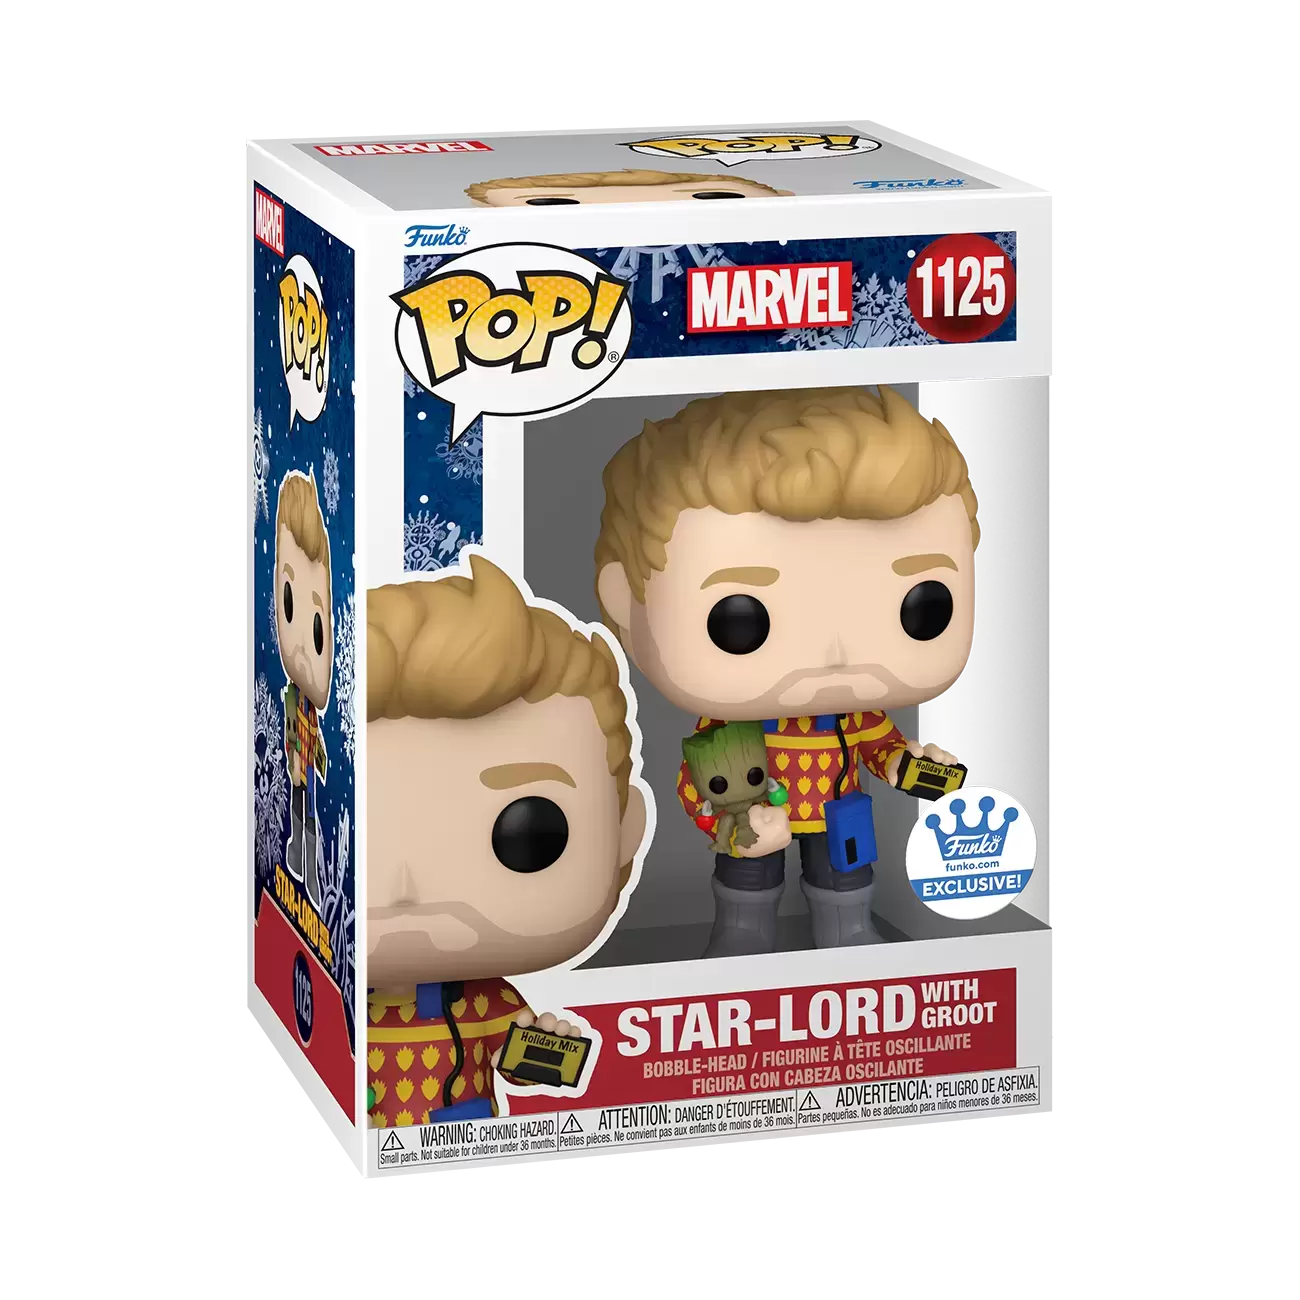 POP! MARVEL - Marvel - Star-Lord with Groot